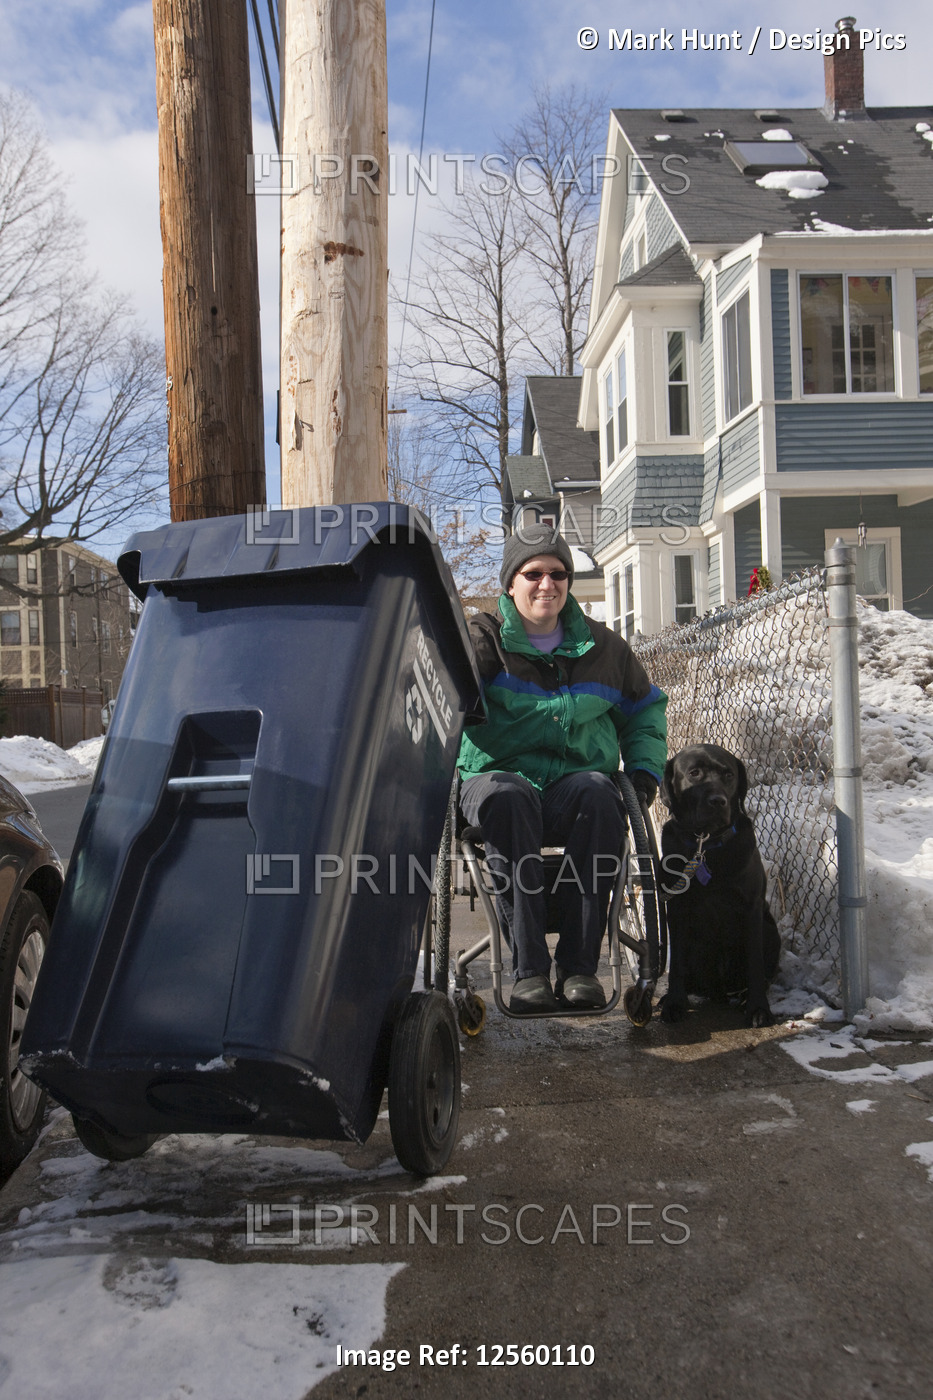 Woman with multiple sclerosis doing recycling with a service dog in winter